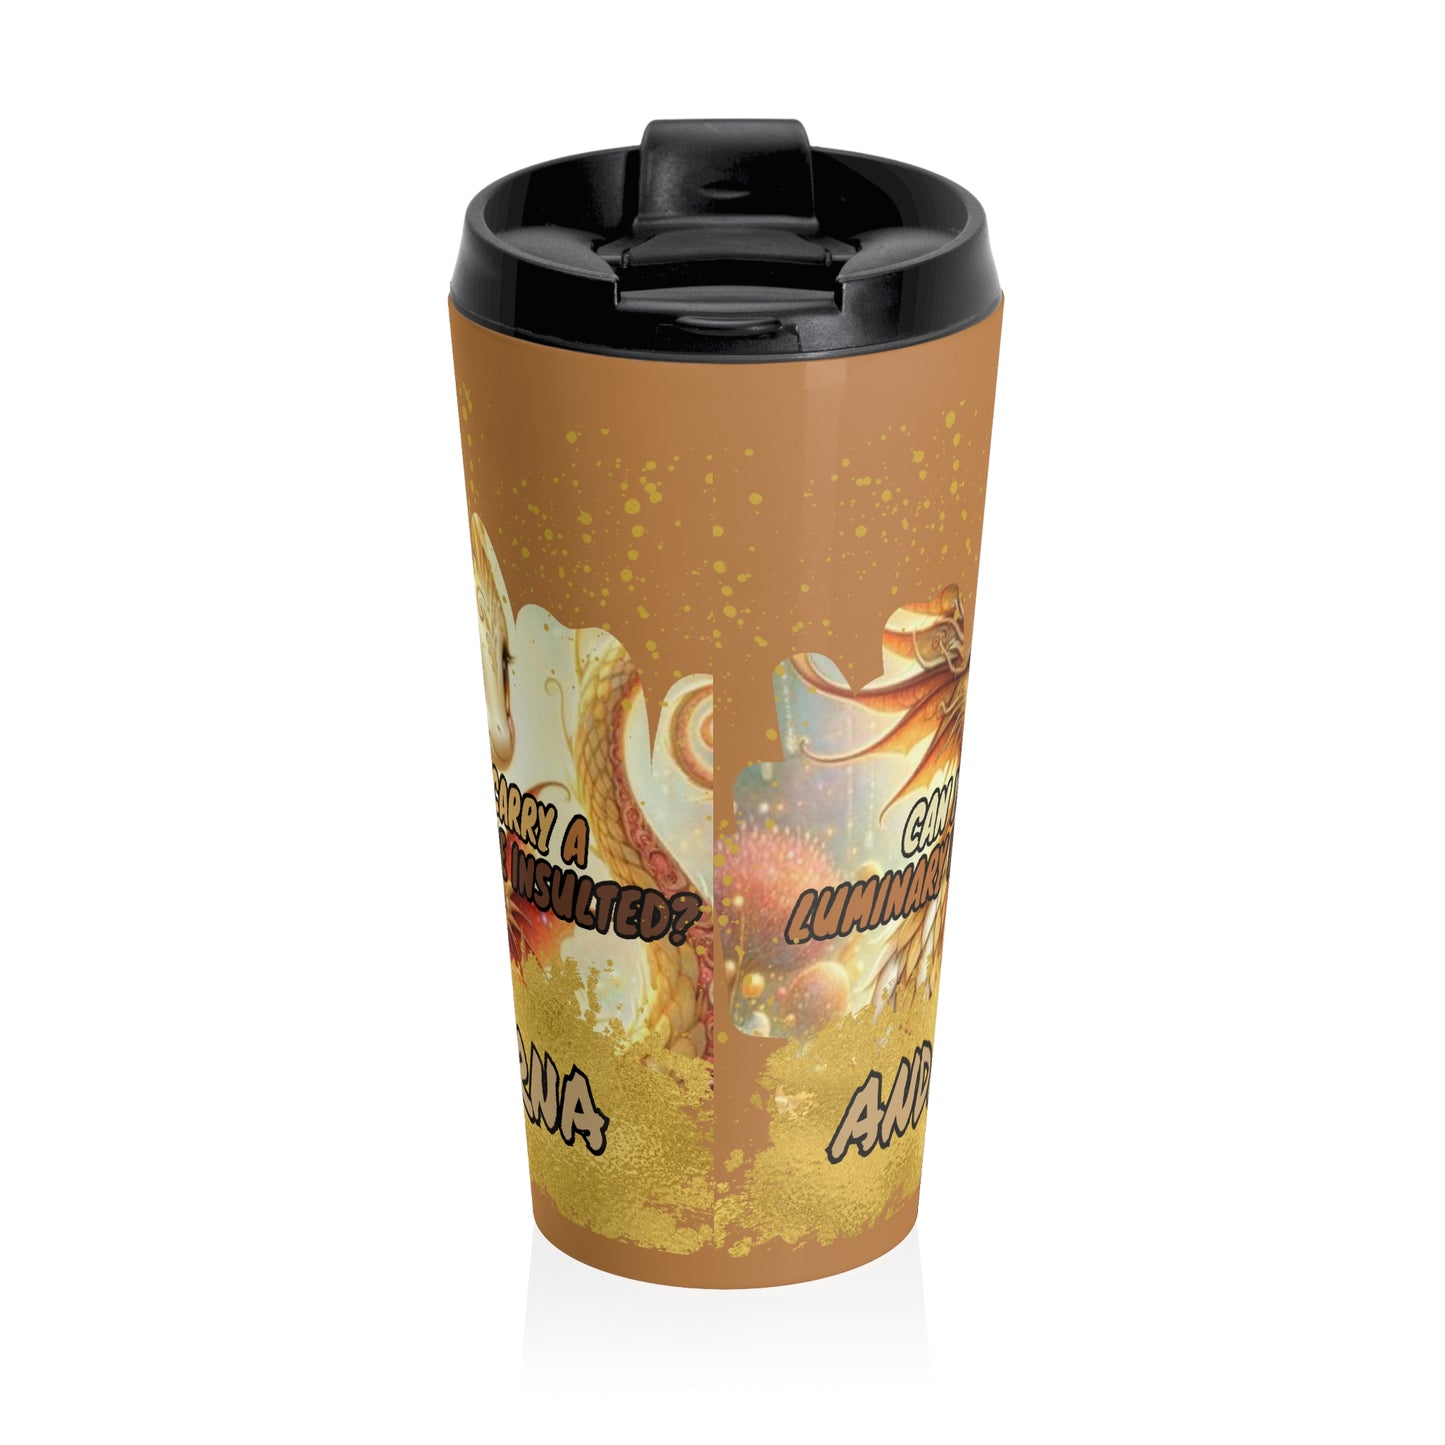 Can you carry a luminary while insulted? Stainless Steel Travel Tumbler